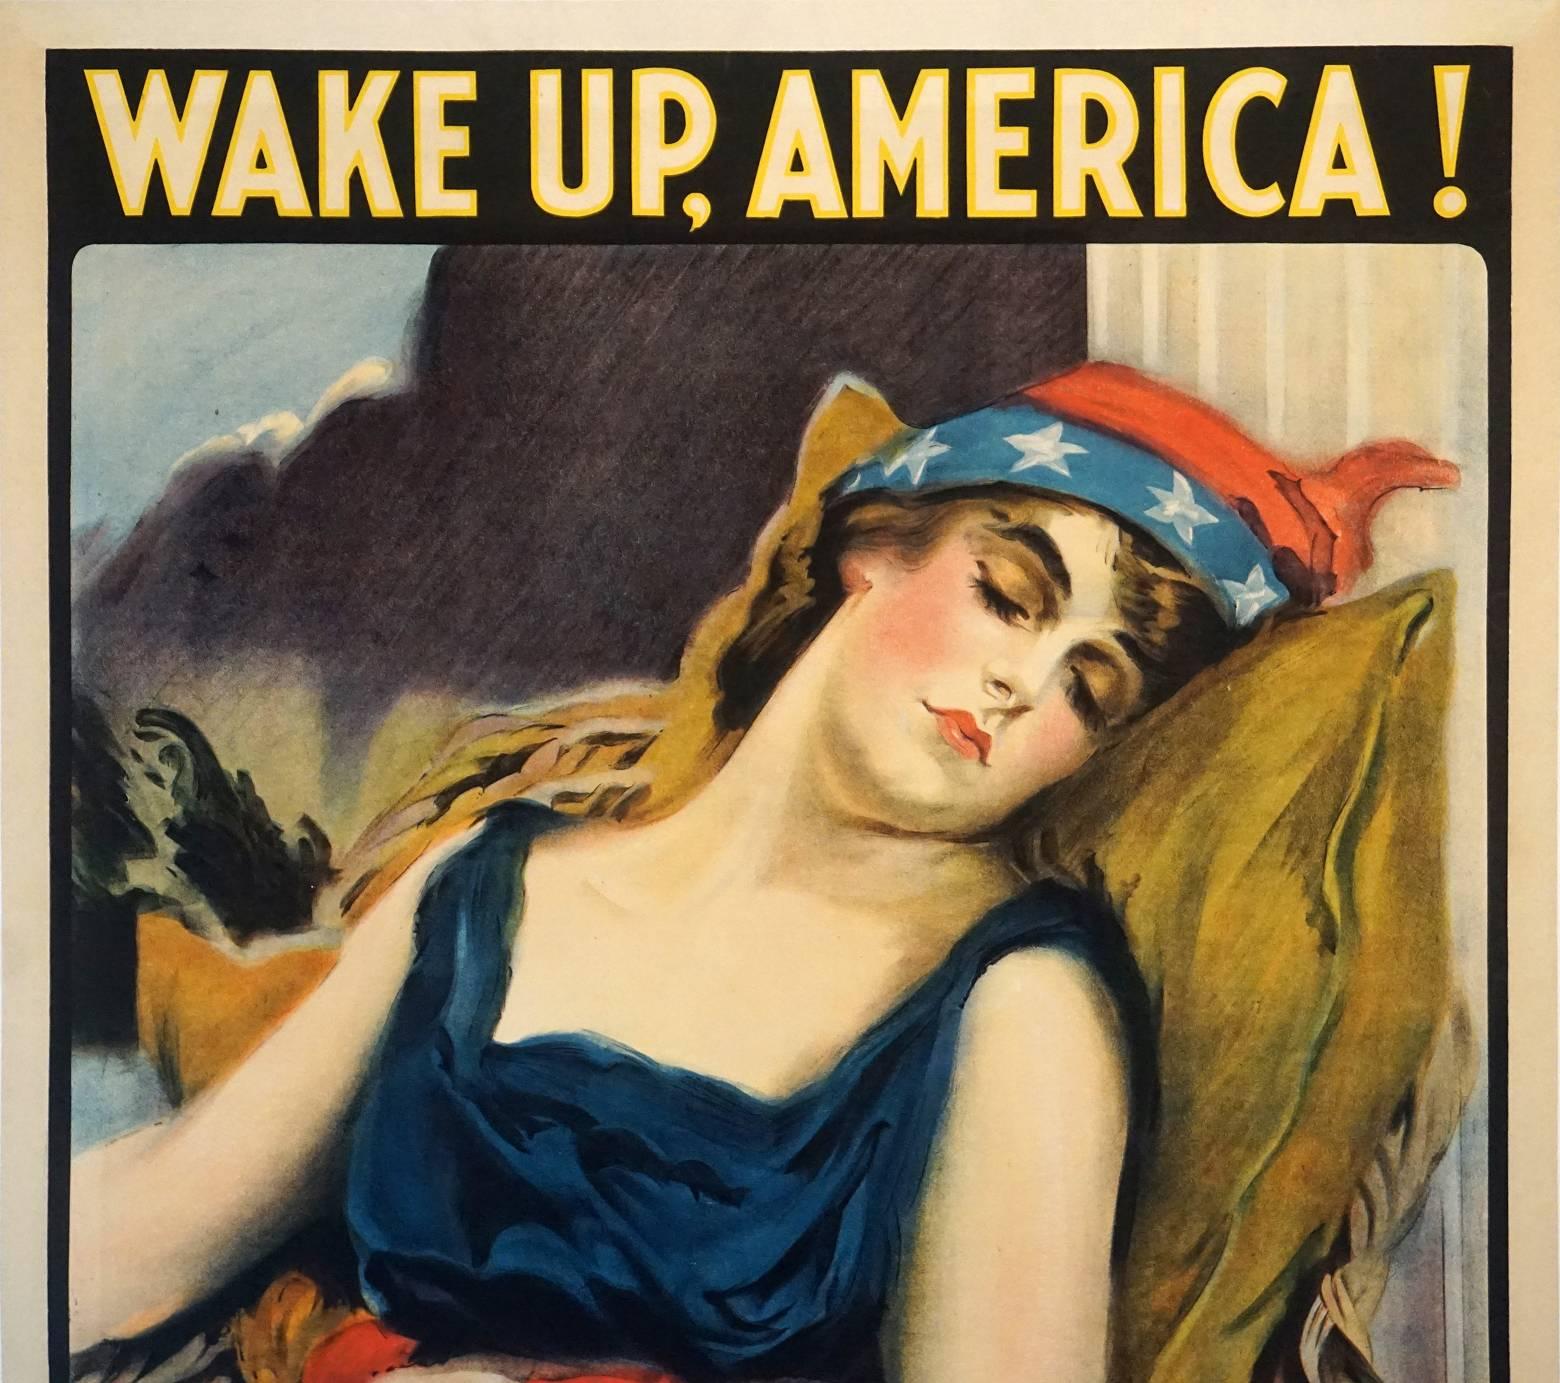 Wake Up America is one of the best and rarest of all of the WWI posters. James Montgomery Flagg, the artist, shows Colombia (or the personification given to the ‘Americas’, or the ‘New World’), napping in Red, White & Blue, as if in false security